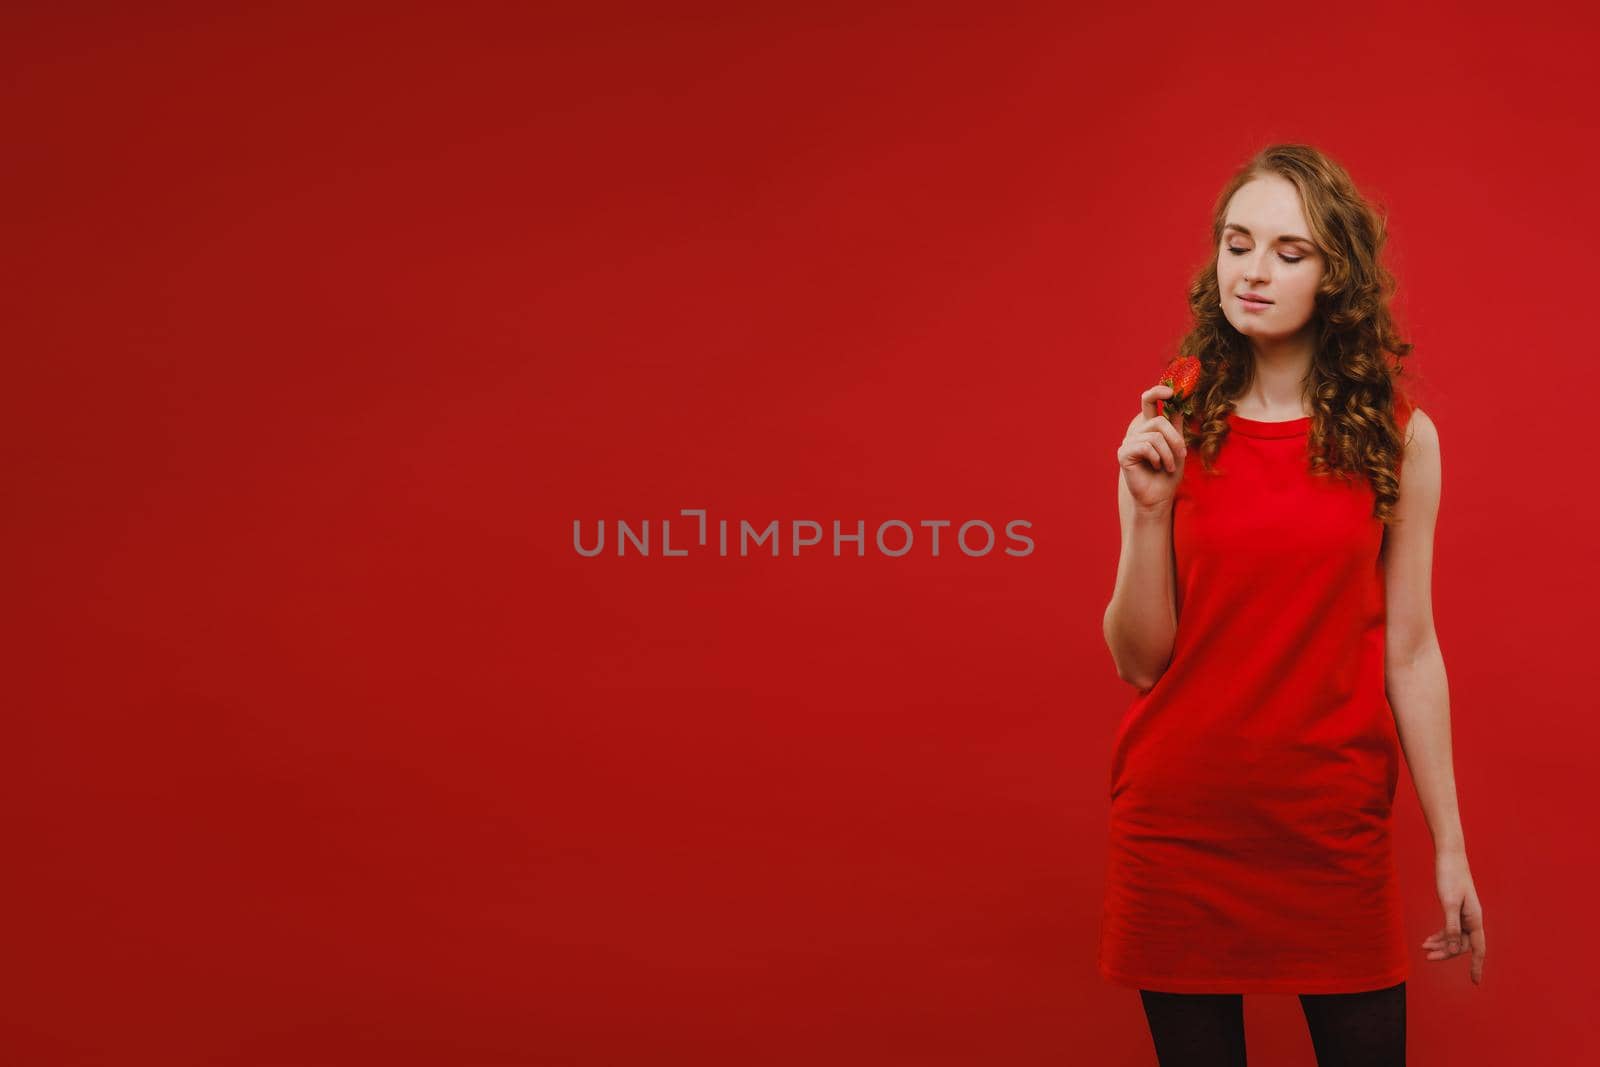 A beautiful girl in a red dress on a red background holds a strawberry in her hands and smiles.